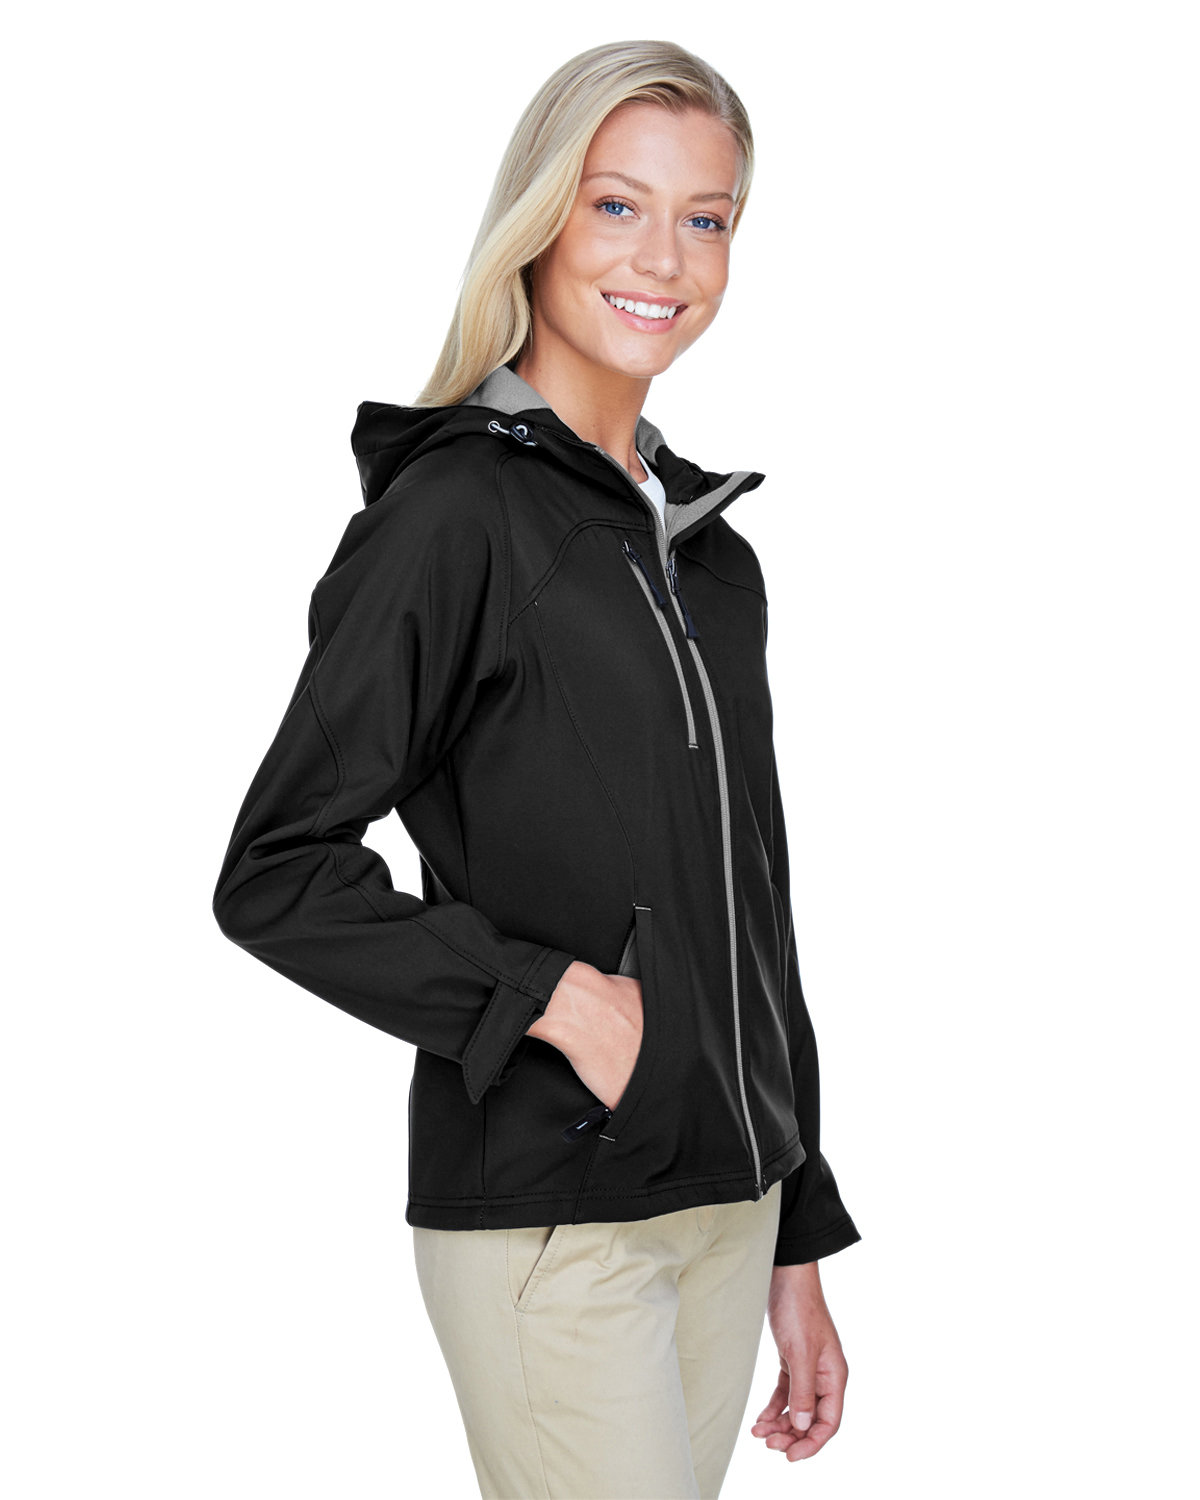 North End Ladies' Prospect Two-Layer Fleece Bonded Soft Shell Hooded ...